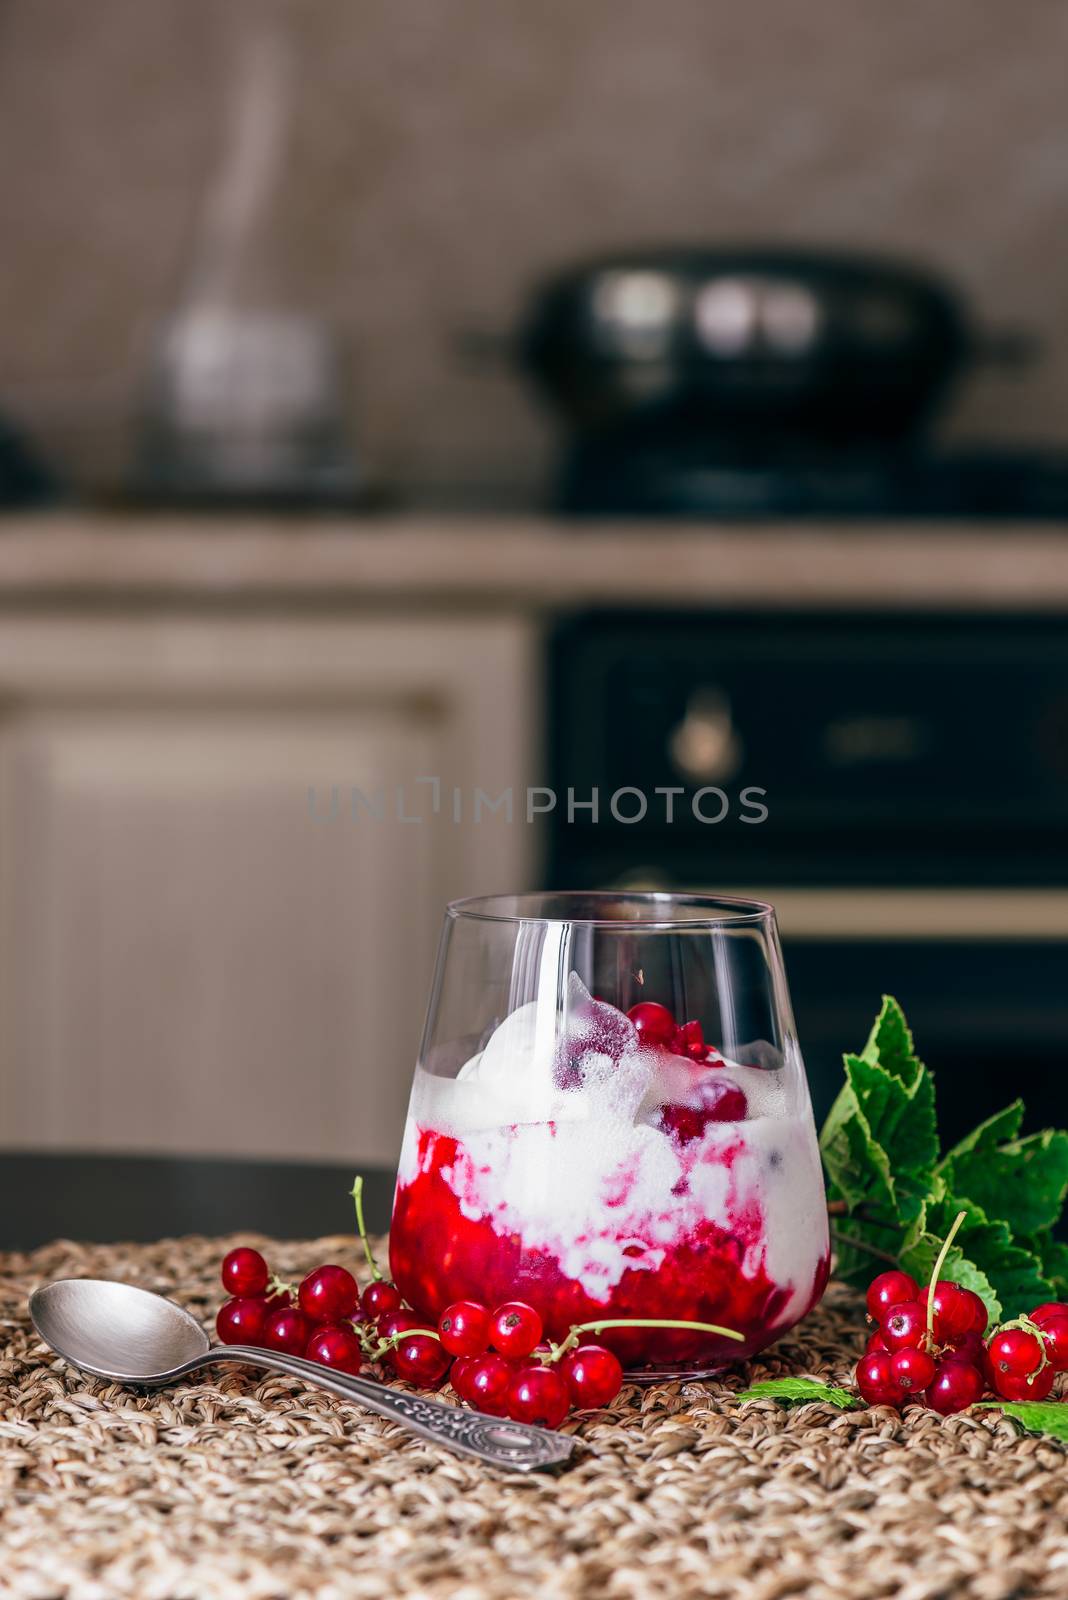 Ice Cream Dessert with Red Currant Jam and Fresh Berries. Kitchen on Background.